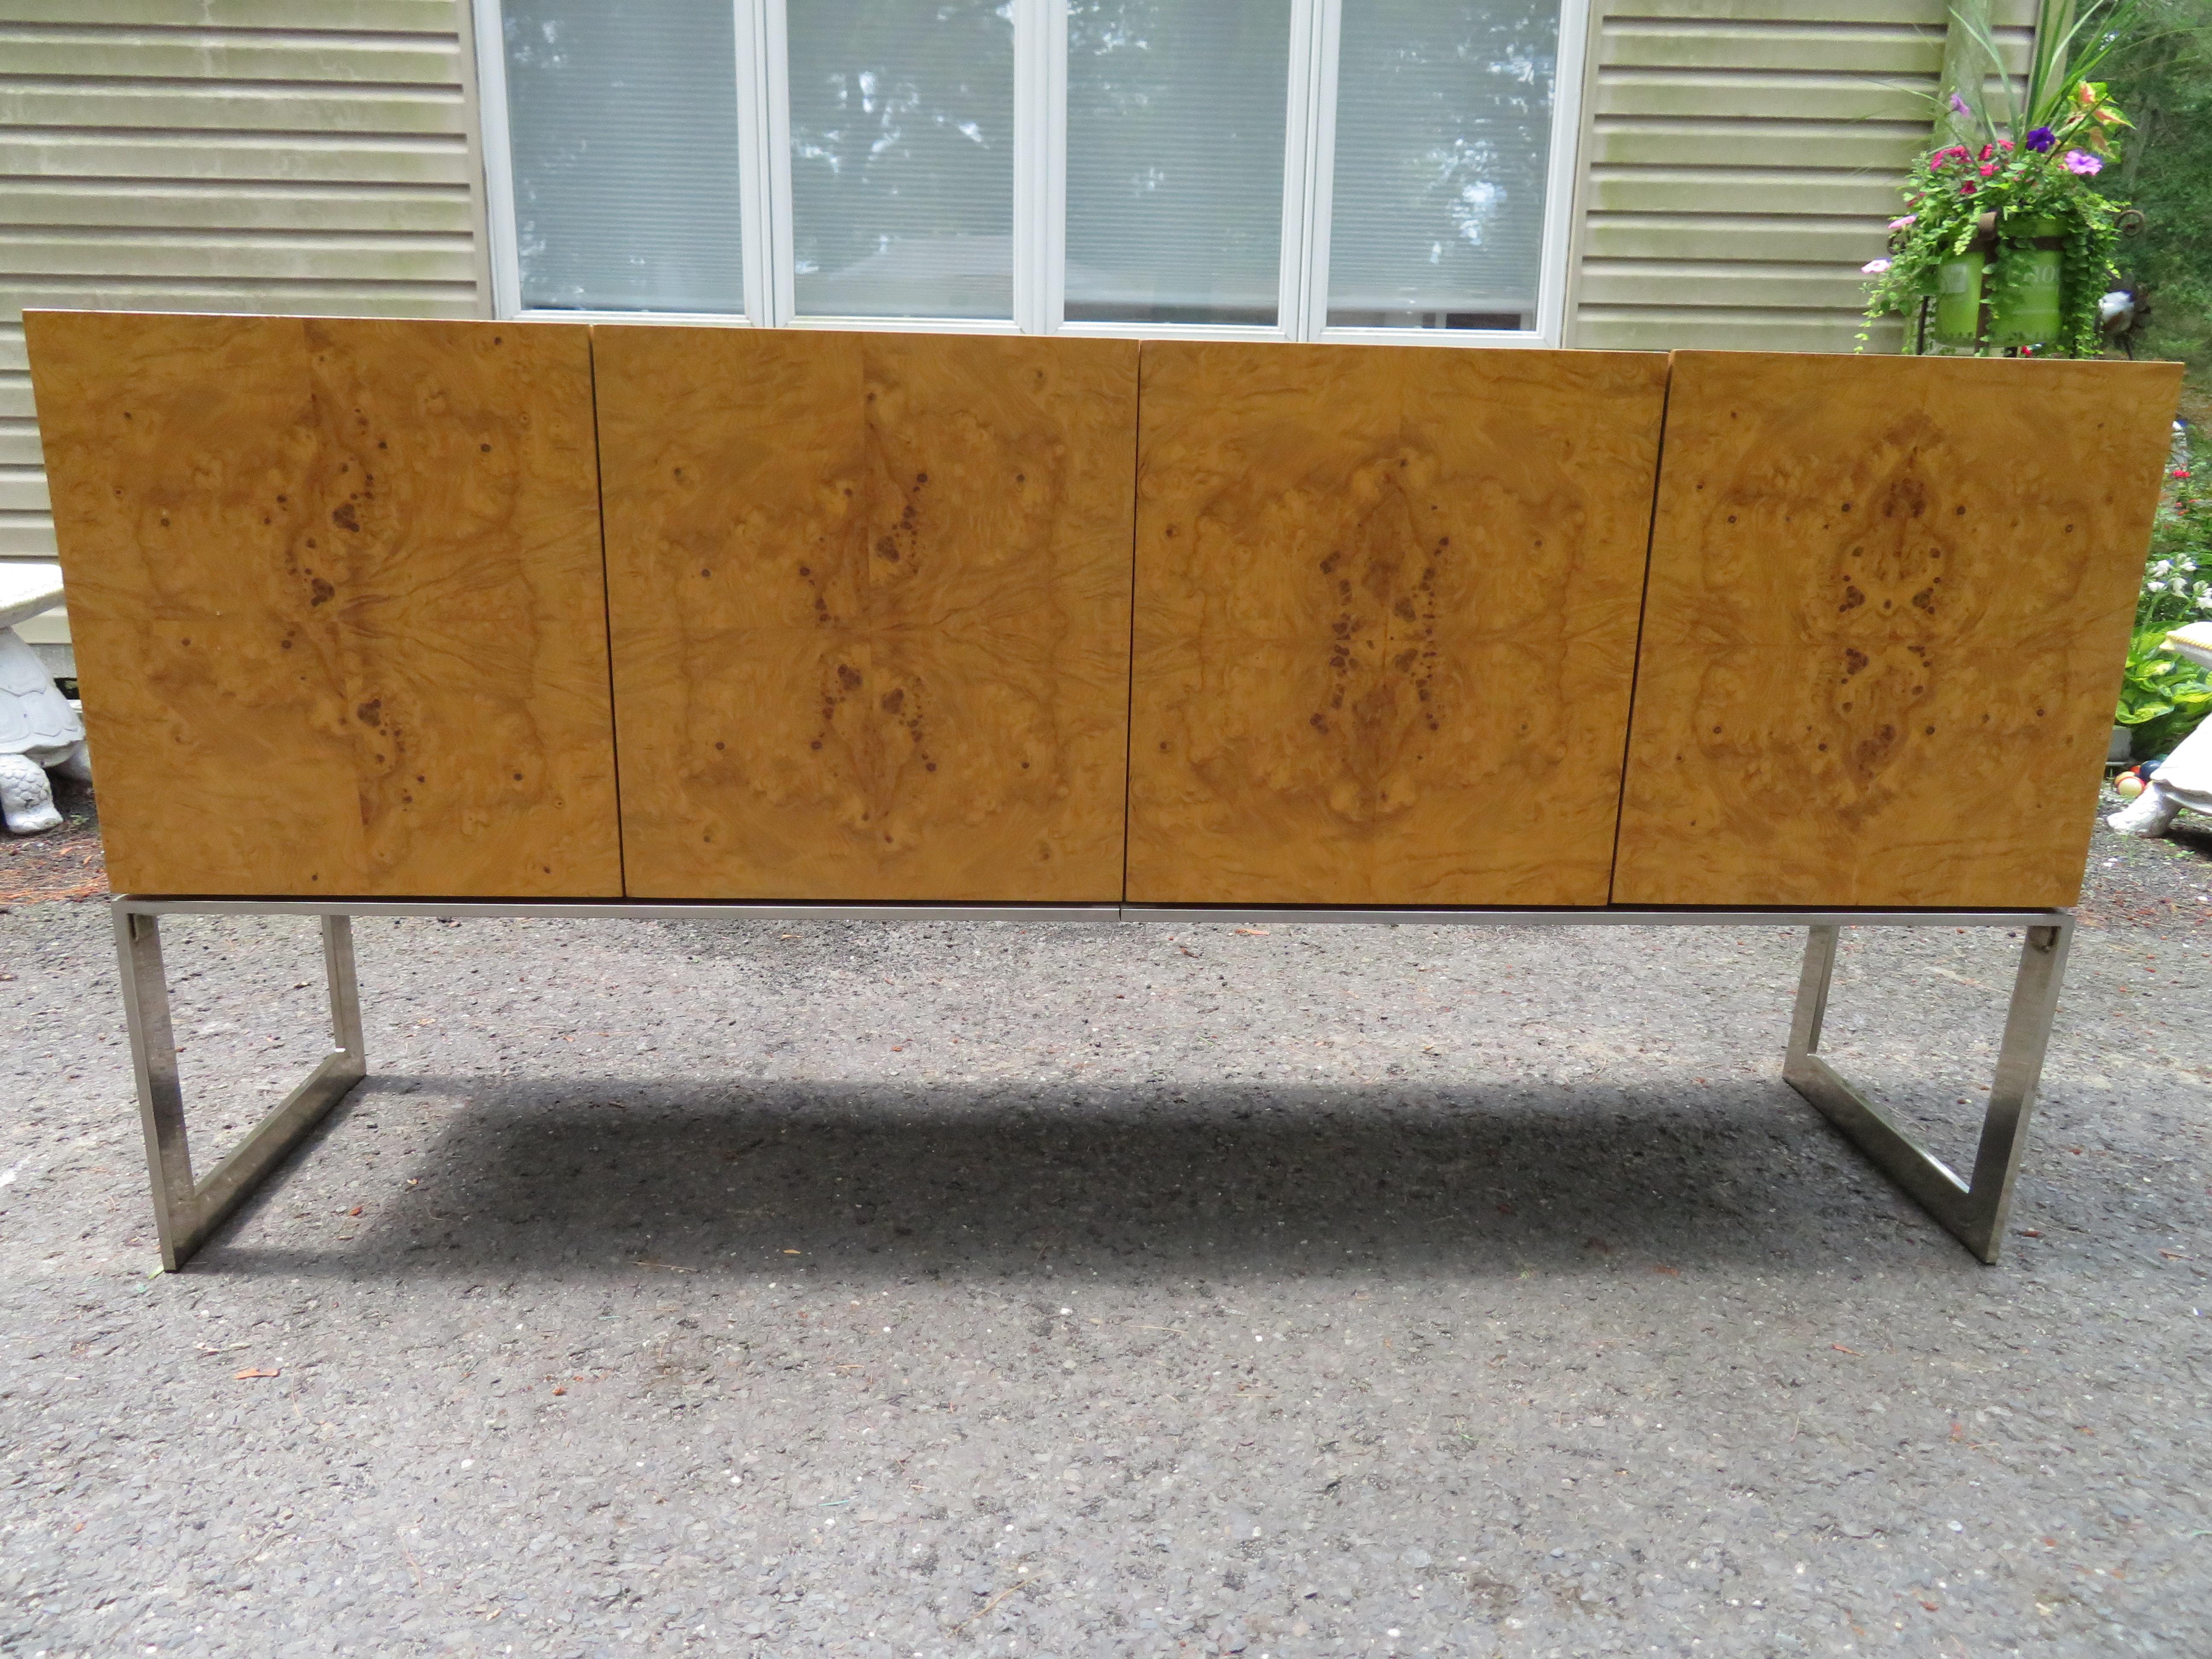 Magnificent Milo Baughman burled olive wood and chrome credenza. This particular piece is in very nice vintage condition, one of the nicest we have had in a long time. It does have the orange velvet silverware dividers in the drawers and the inside